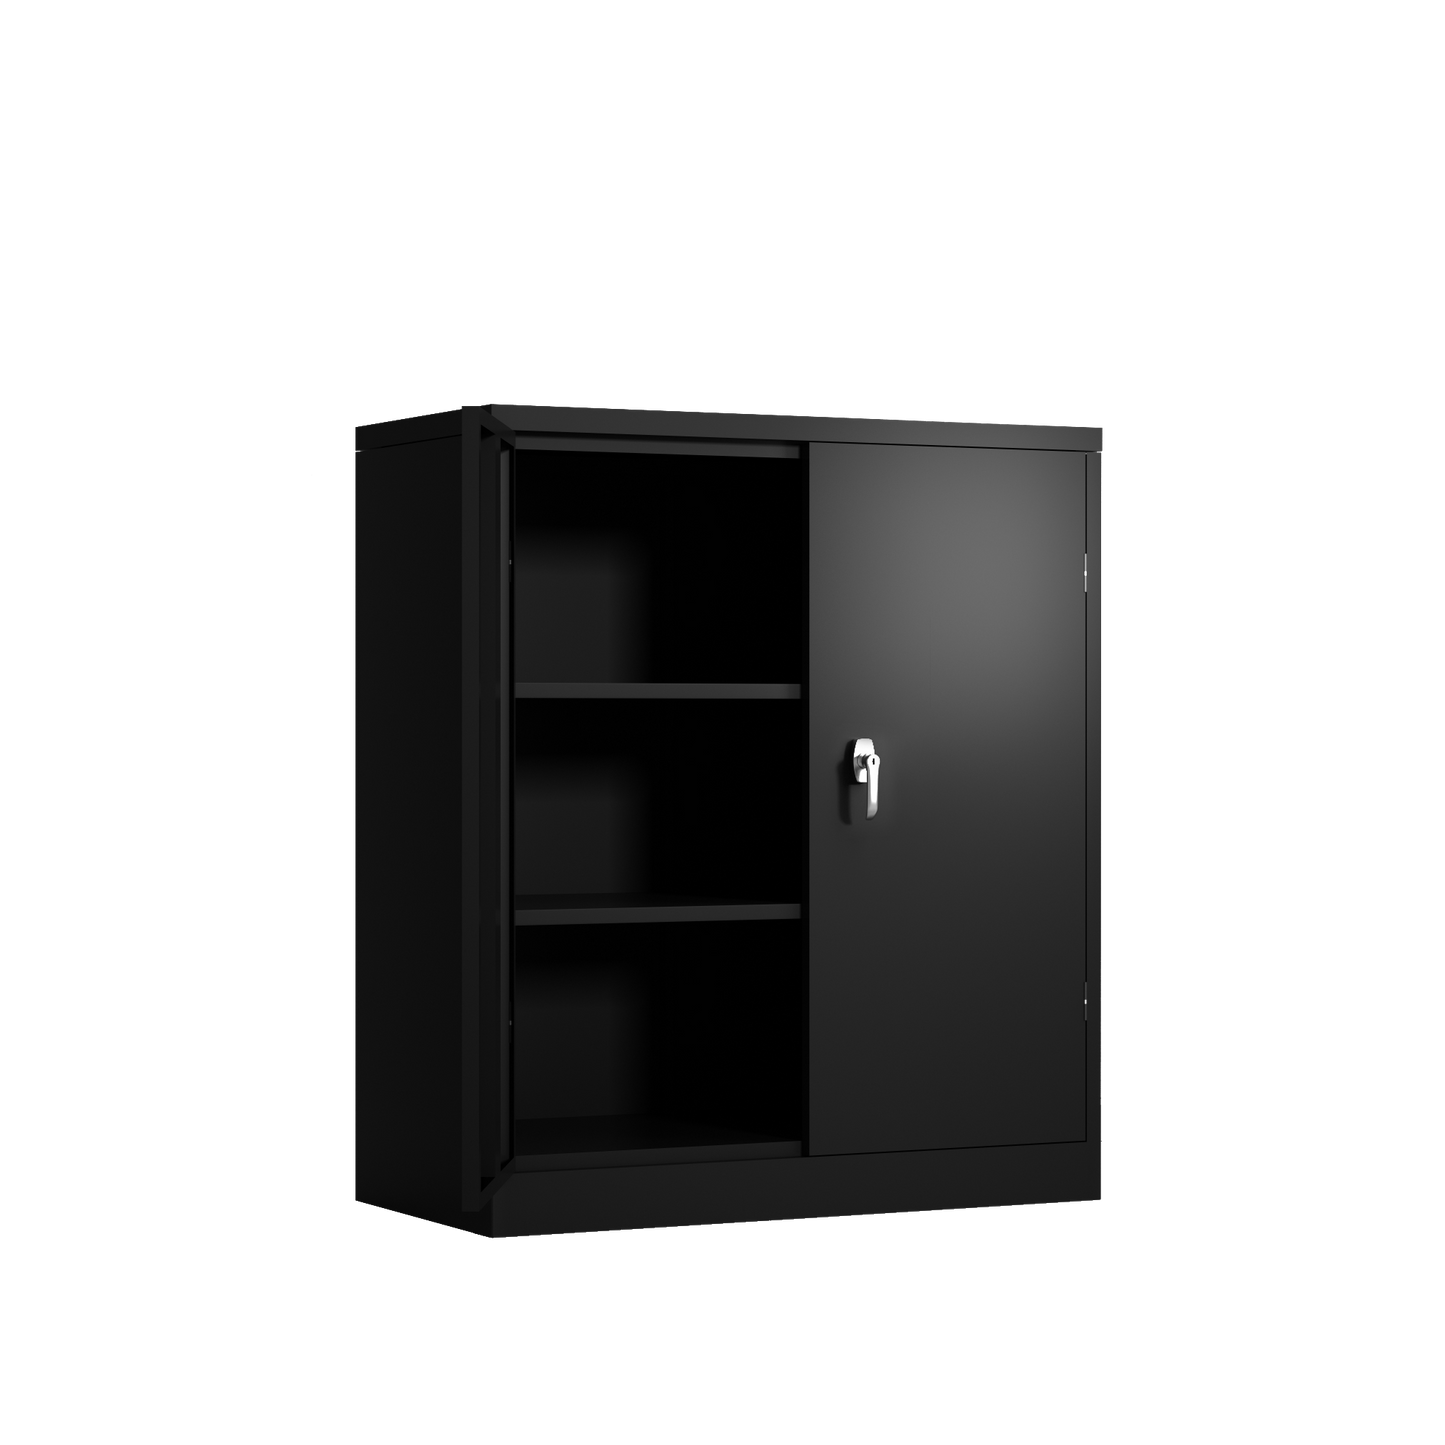 Metal Storage Cabinet with 2 Doors and 2 Shelves, Lockable Steel Storage Cabinet for Office, Garage, Warehouse